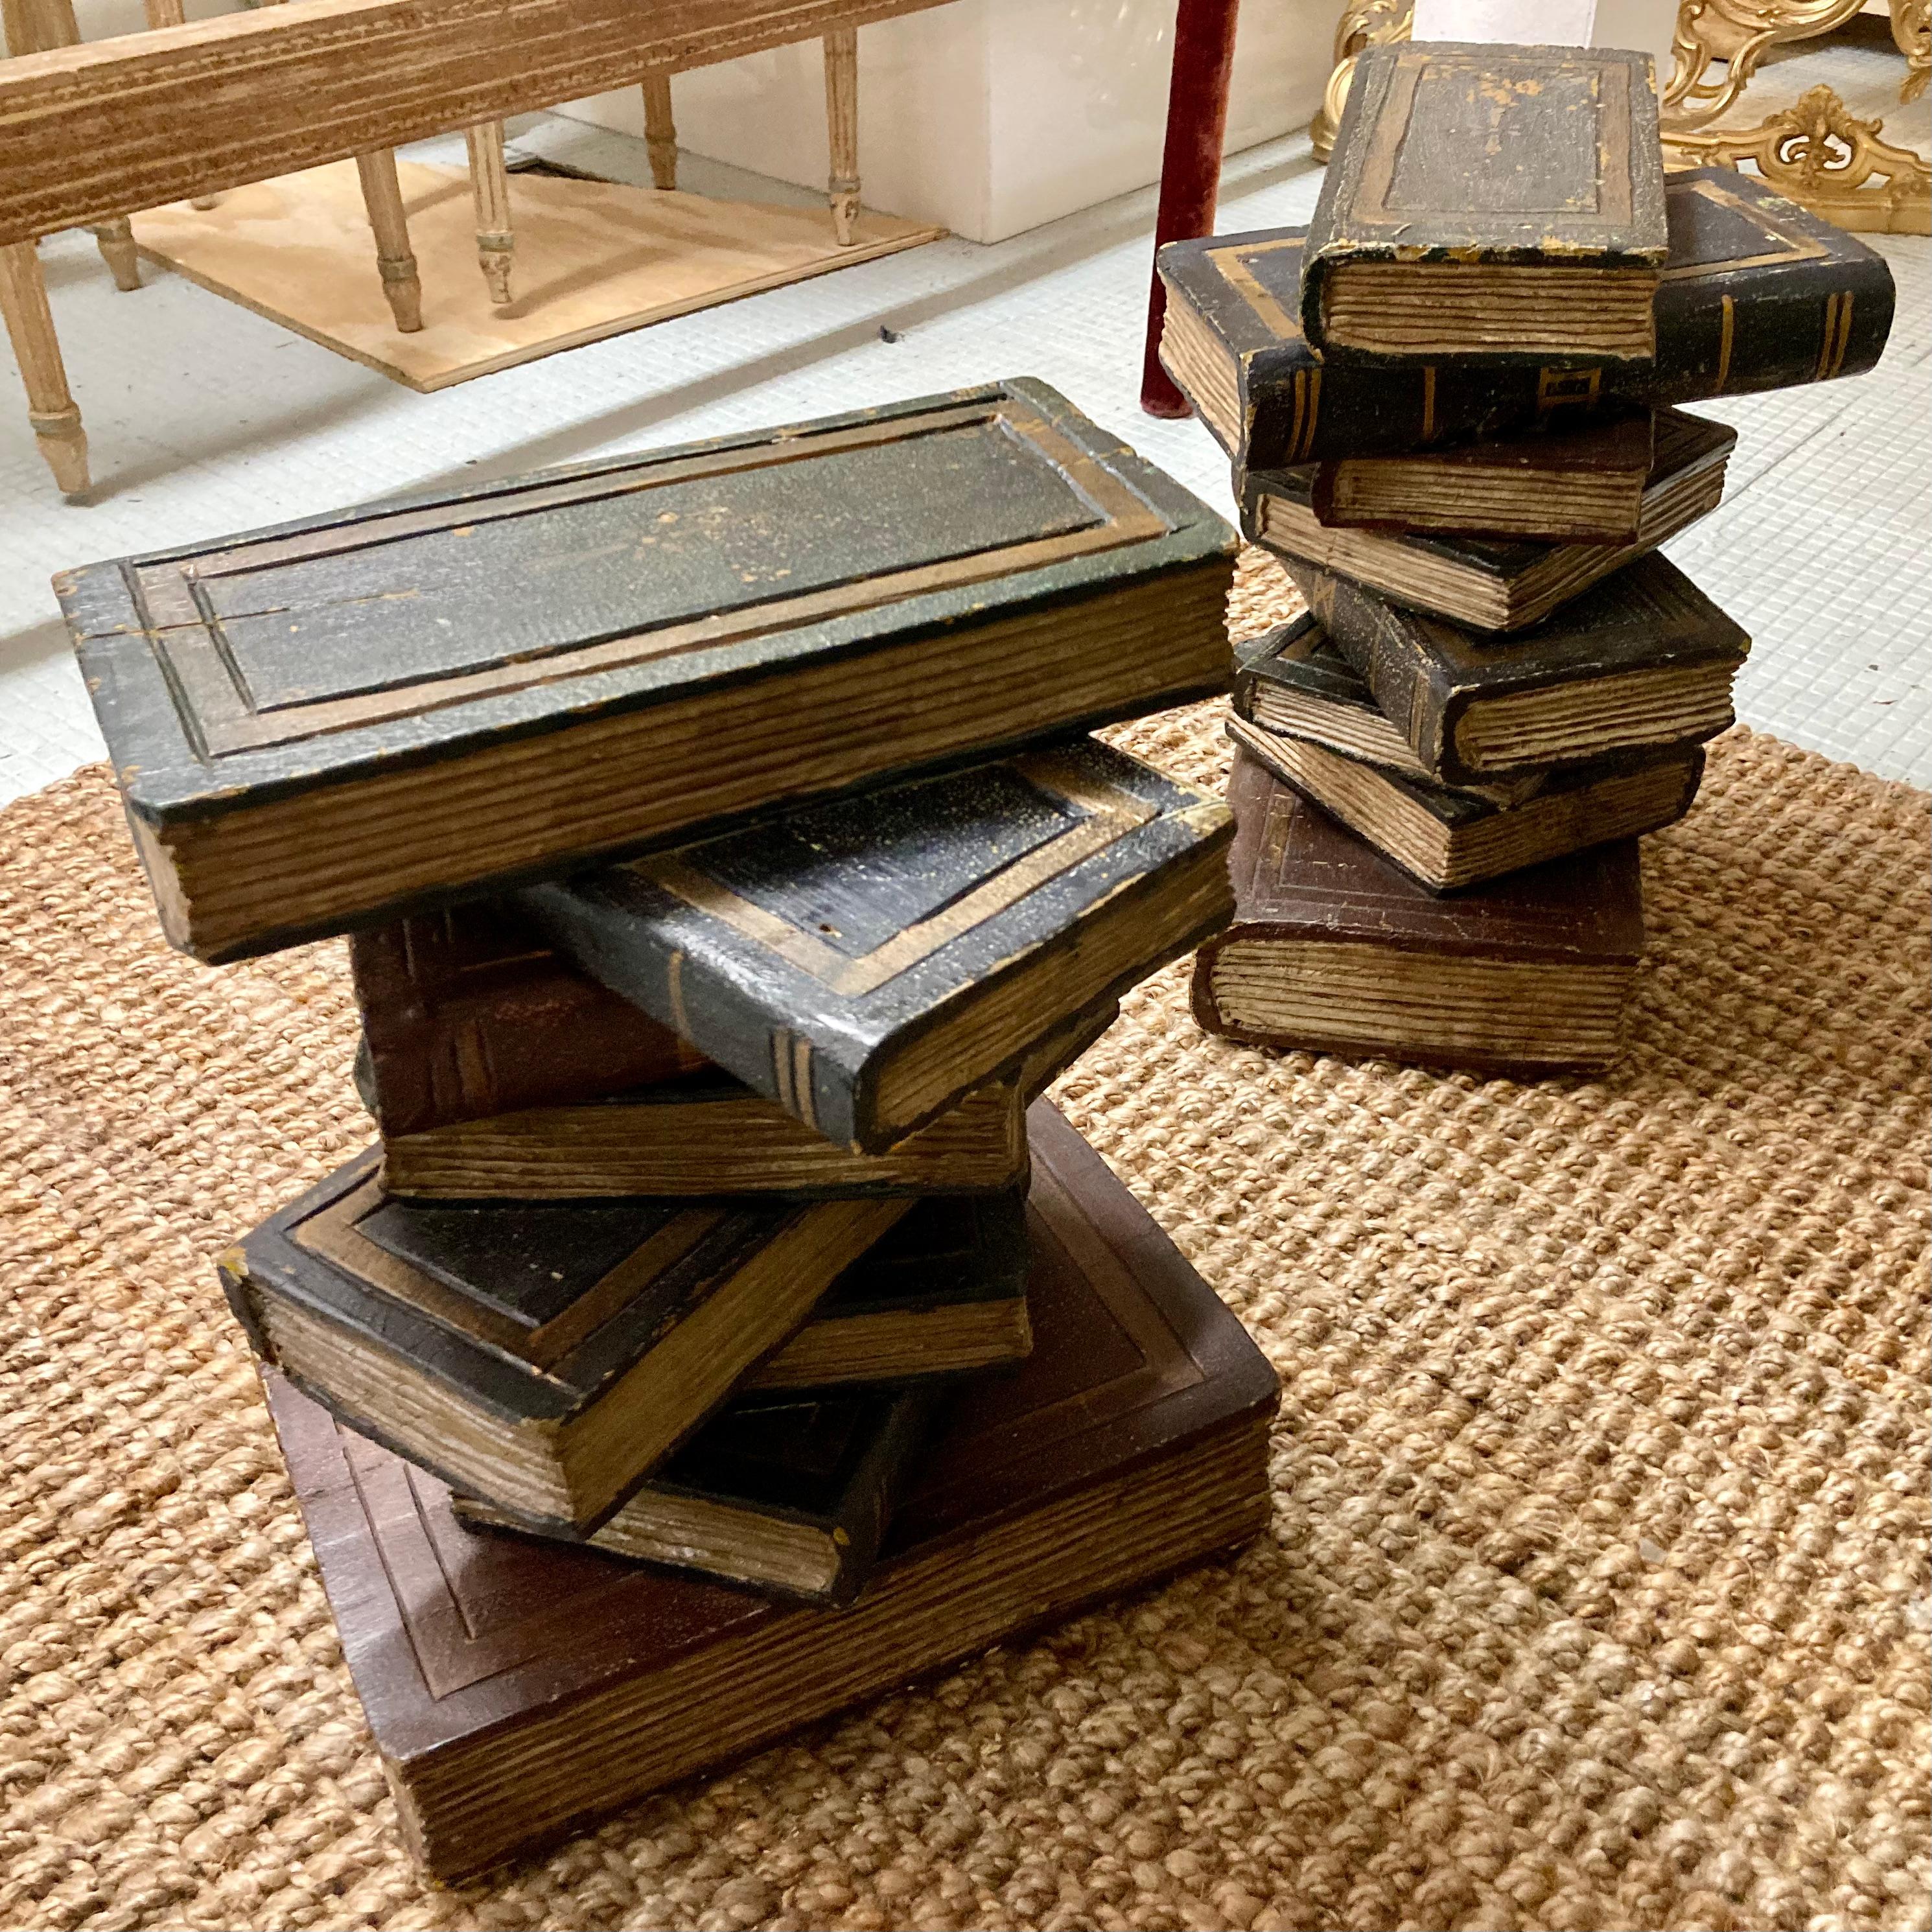 Mid-20th Century French Carved Wood Stacked Book Cocktail Tables, a Pair For Sale